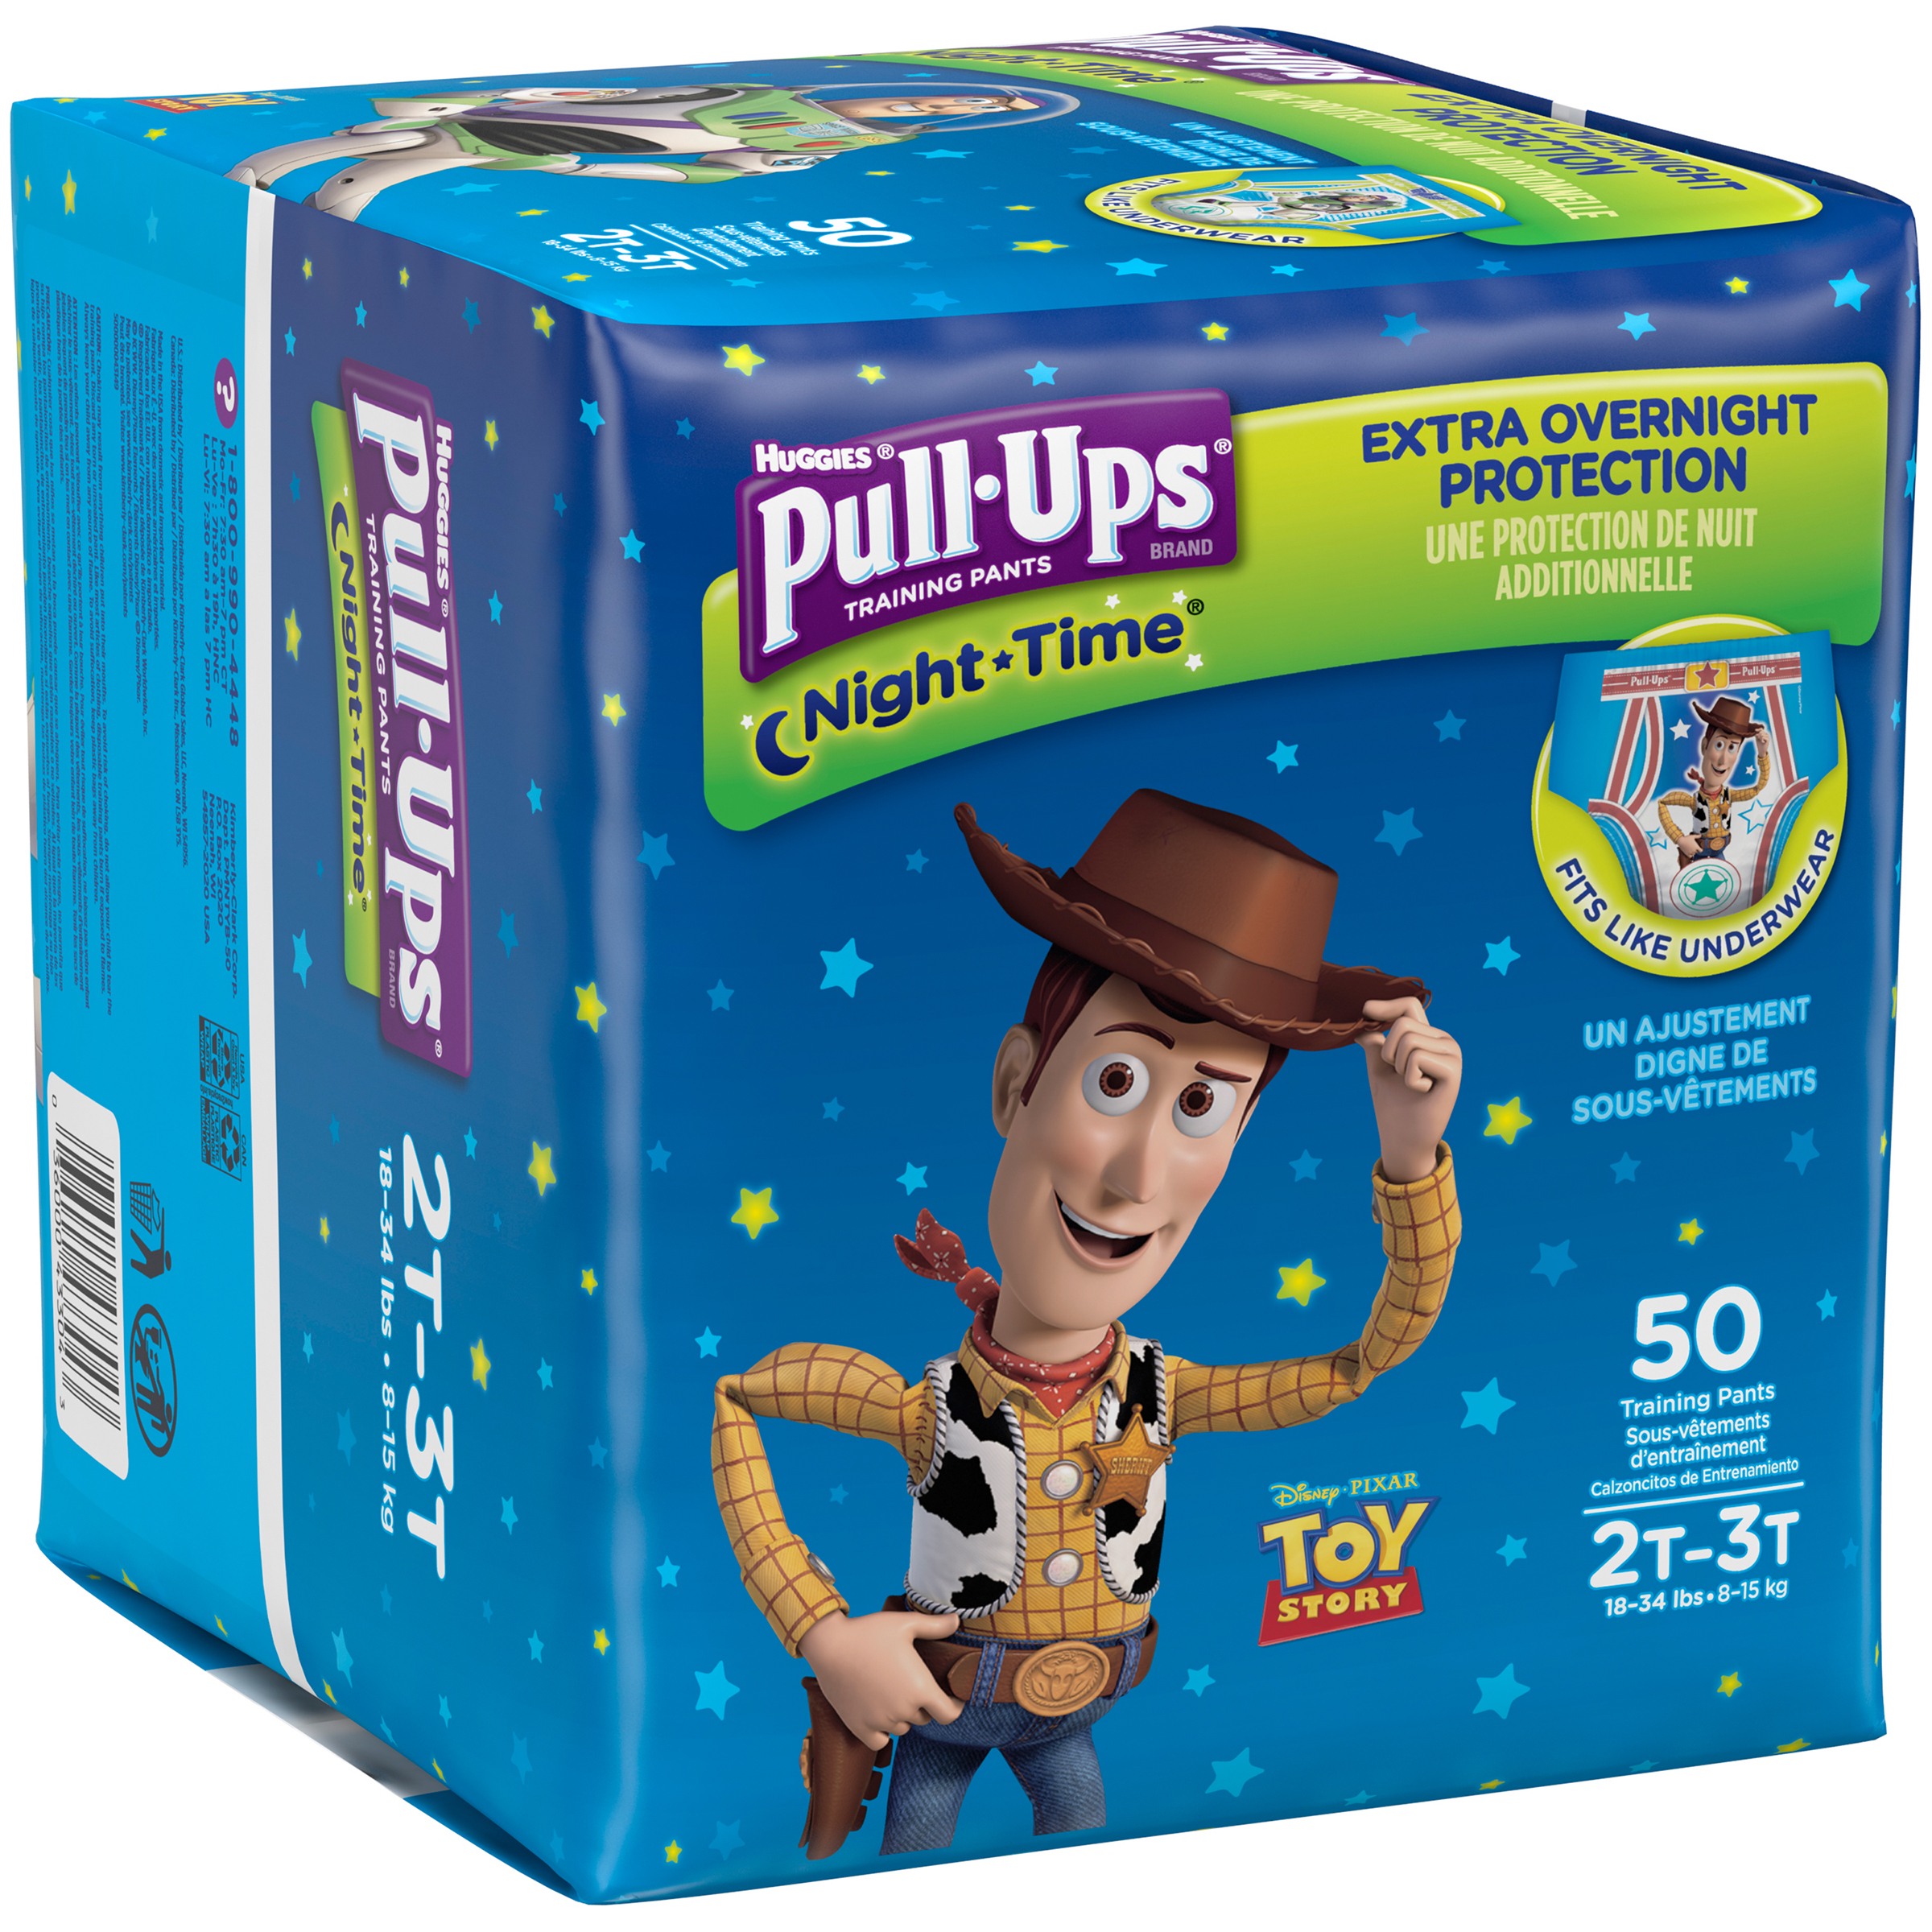 Pull-Ups Training Pants, NightTime for Boys 2T-3T - image 1 of 9